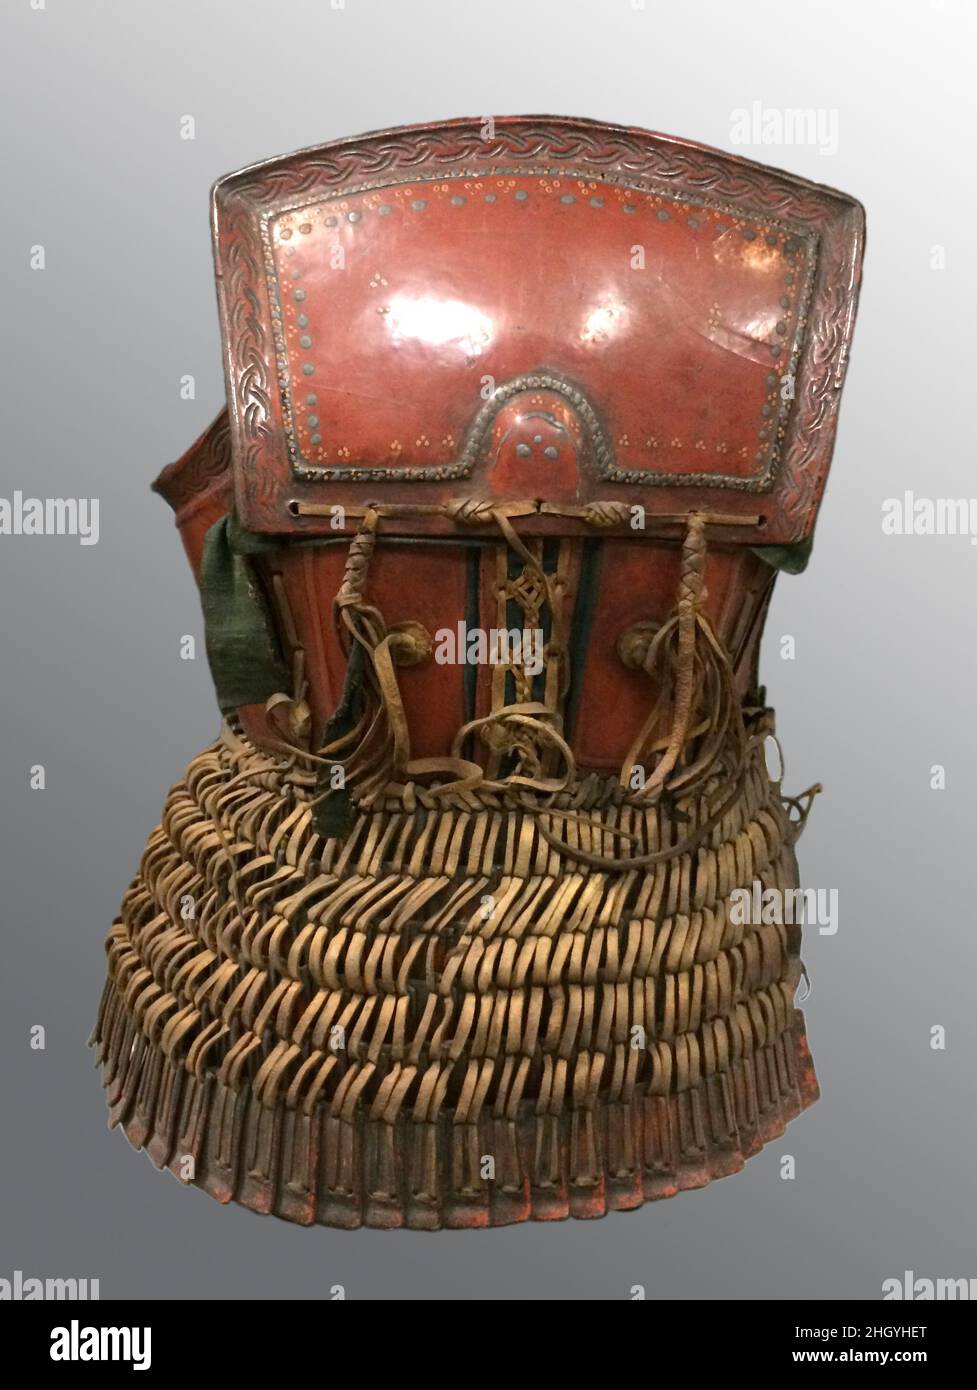 Cuirass 18th–19th century Yi or Nuosu people (Lolo). Cuirass. Yi or Nuosu people (Lolo). 18th–19th century. Wood, lacquer, leather. Sichuan. Armor Parts-Cuirasses Stock Photo